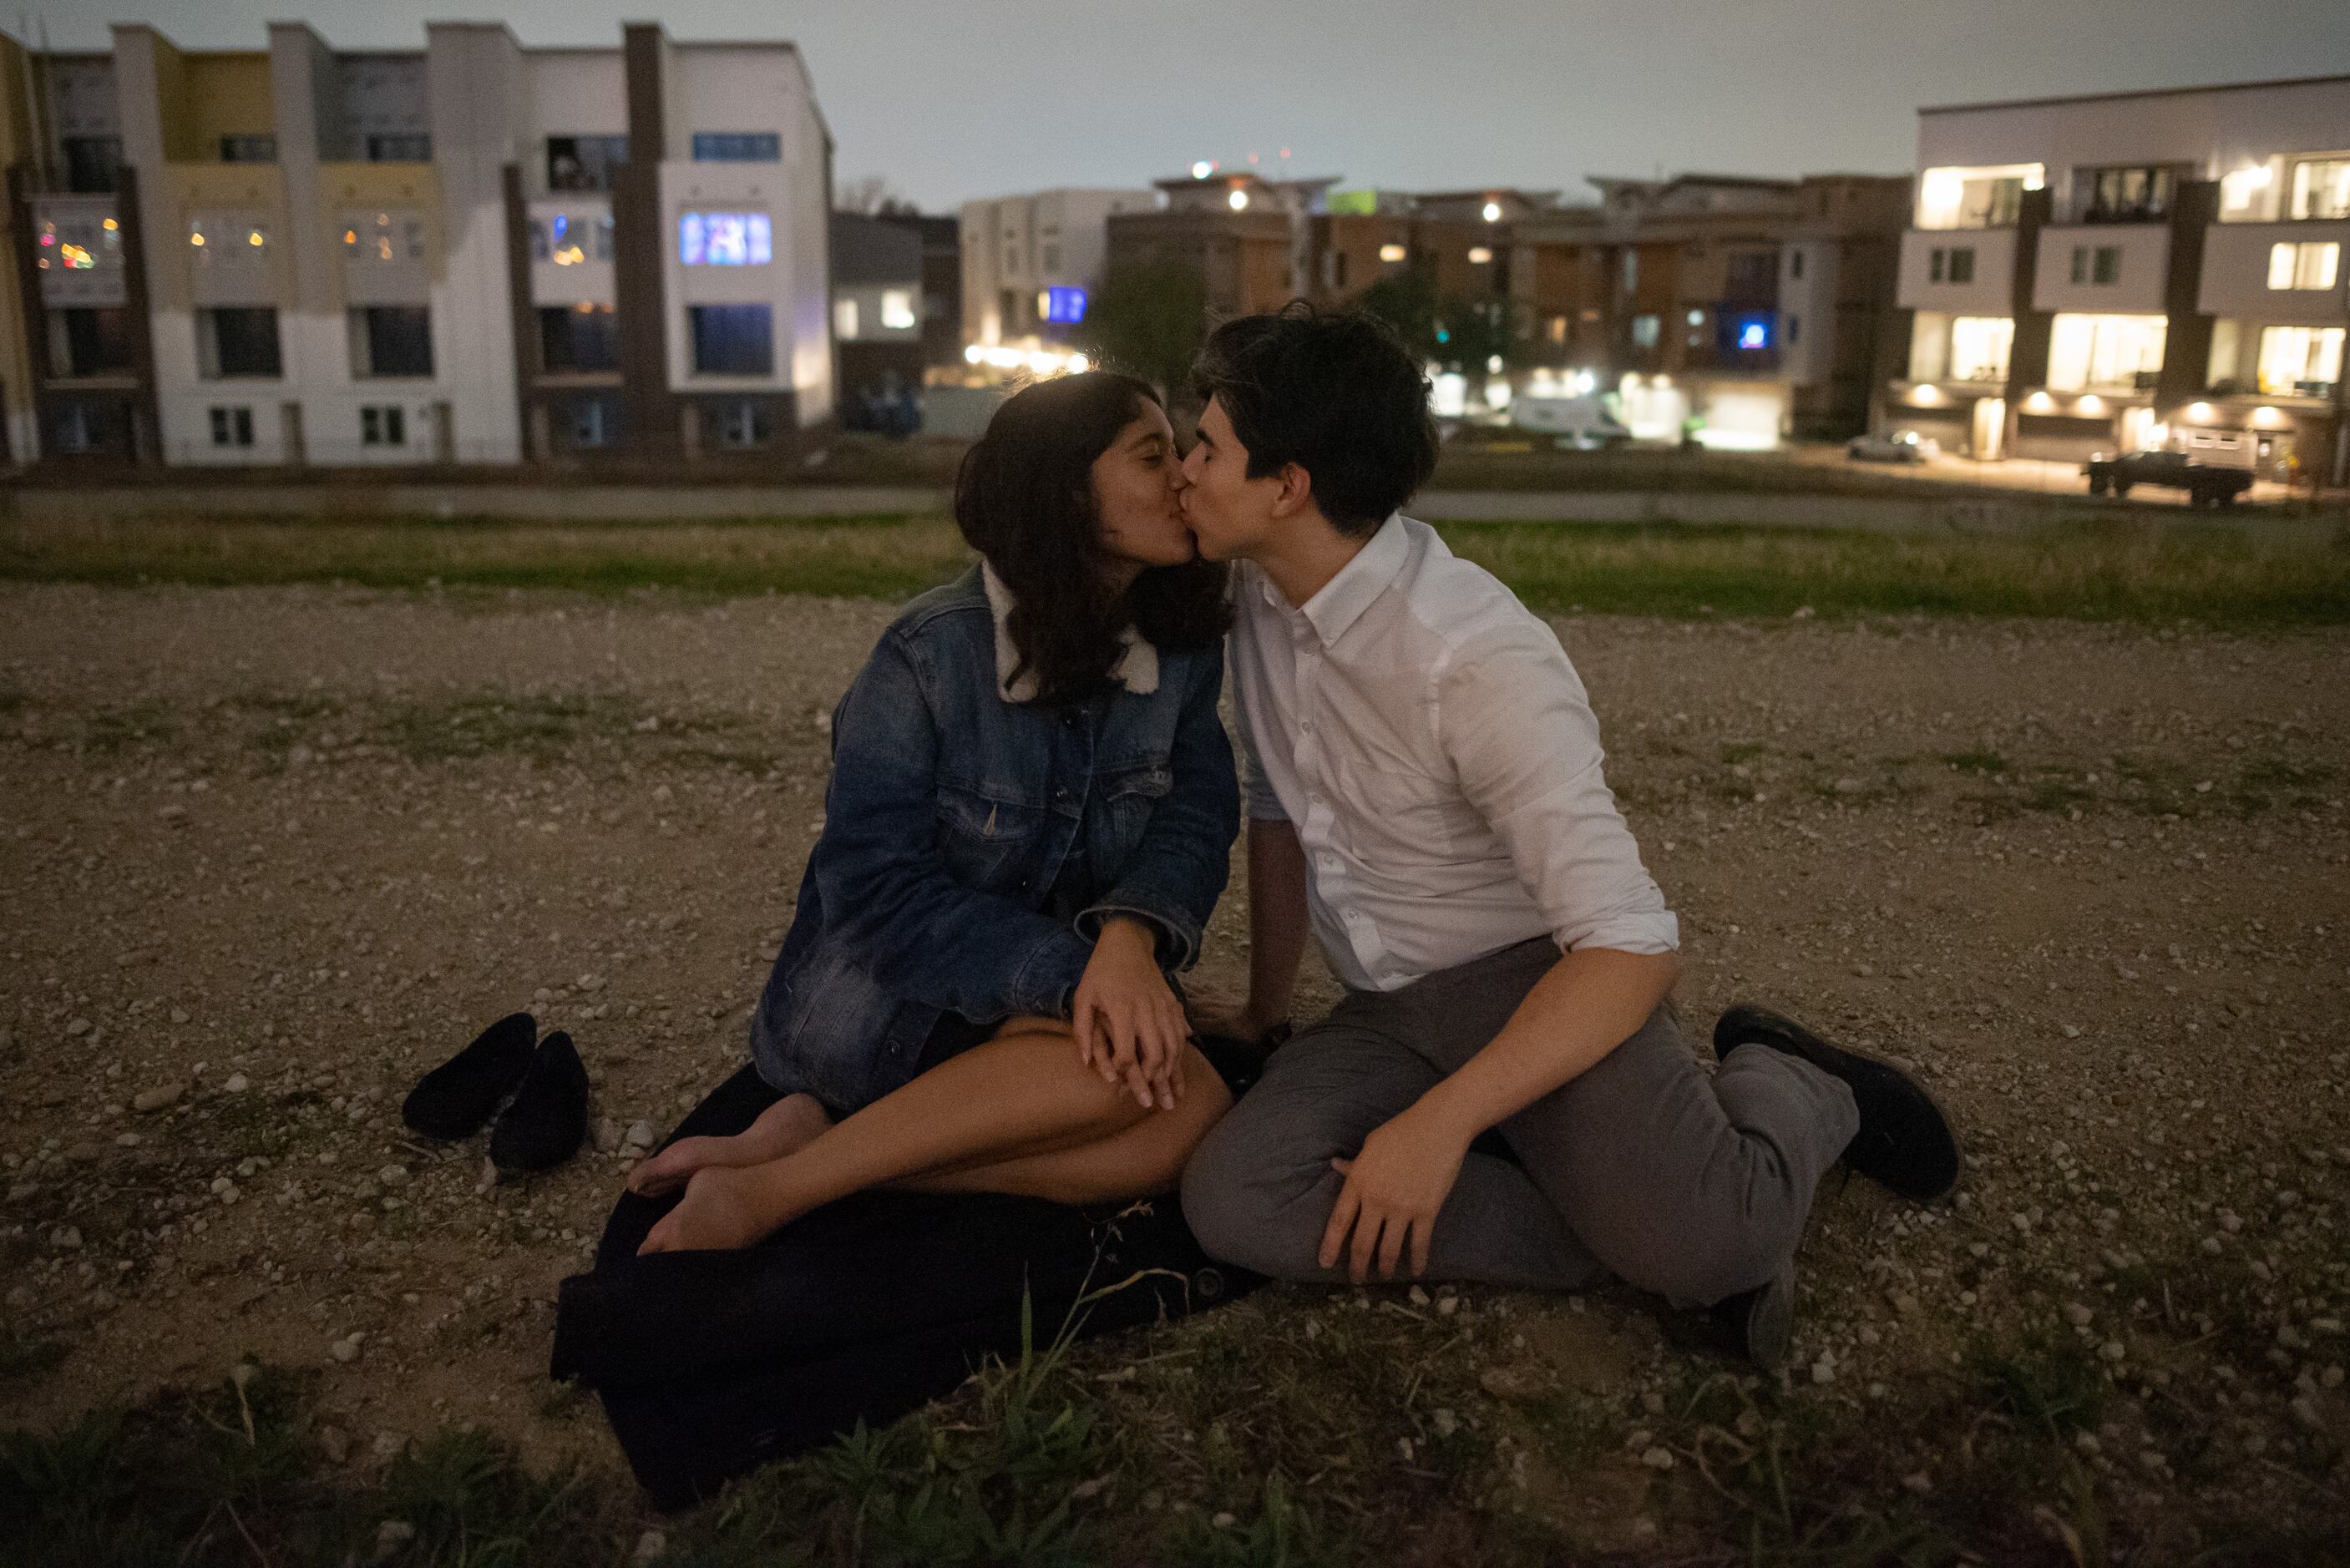 Brynetta Ransom, 23, left, and Kyler Ramos, 26, both of Carrollton, have their first kiss of...